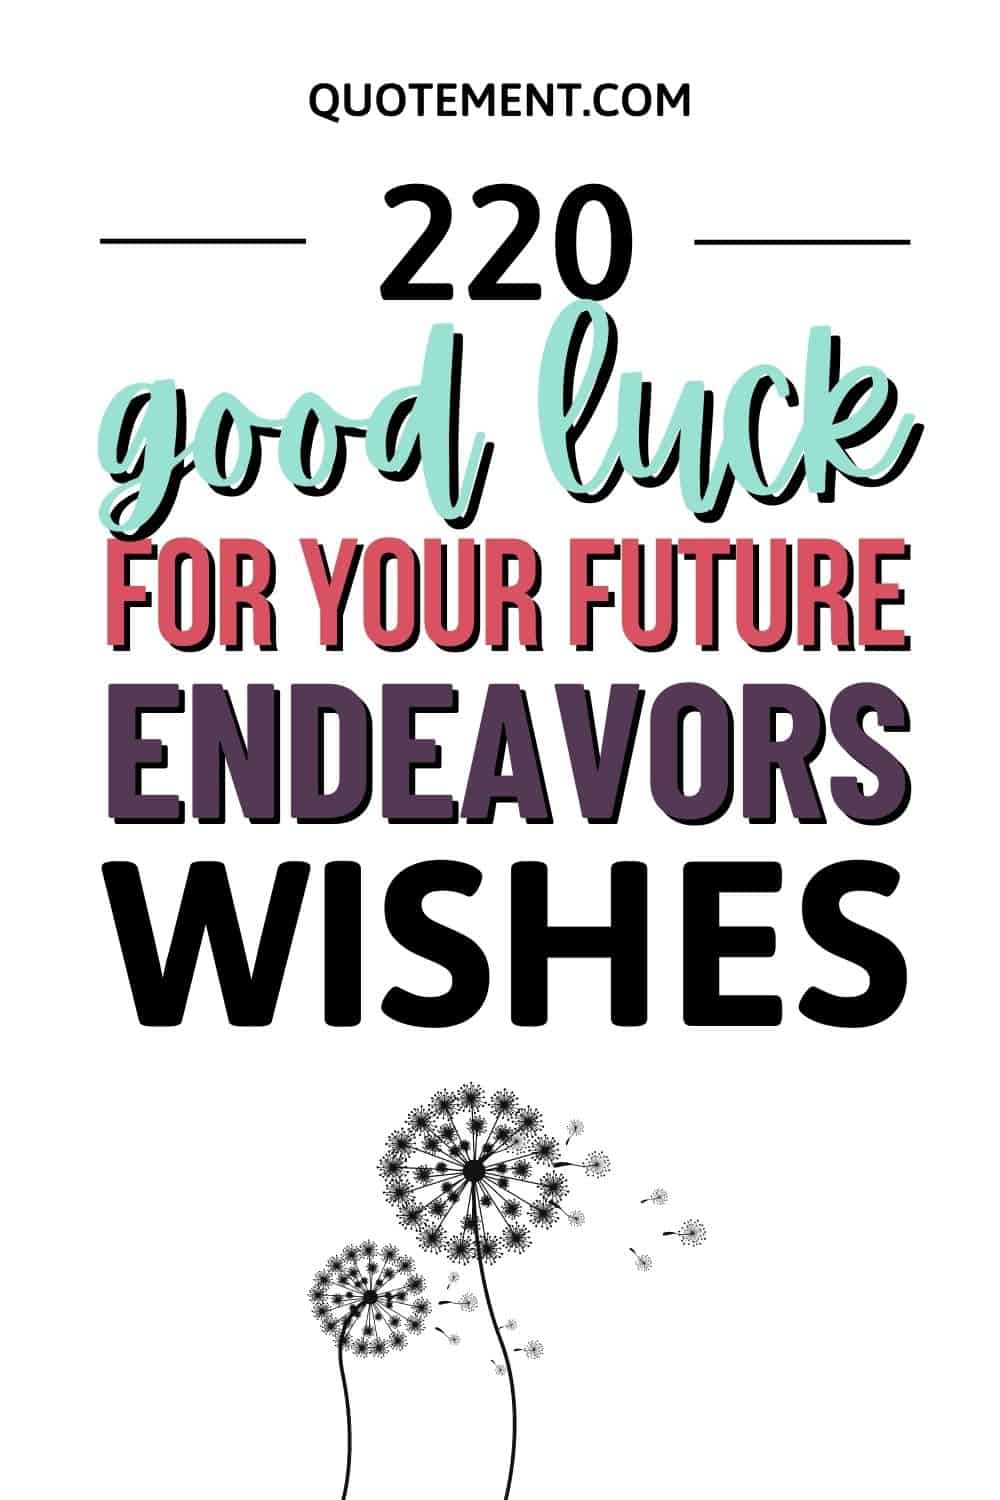 220 Good Luck For Your Future Endeavors Wishes & Messages